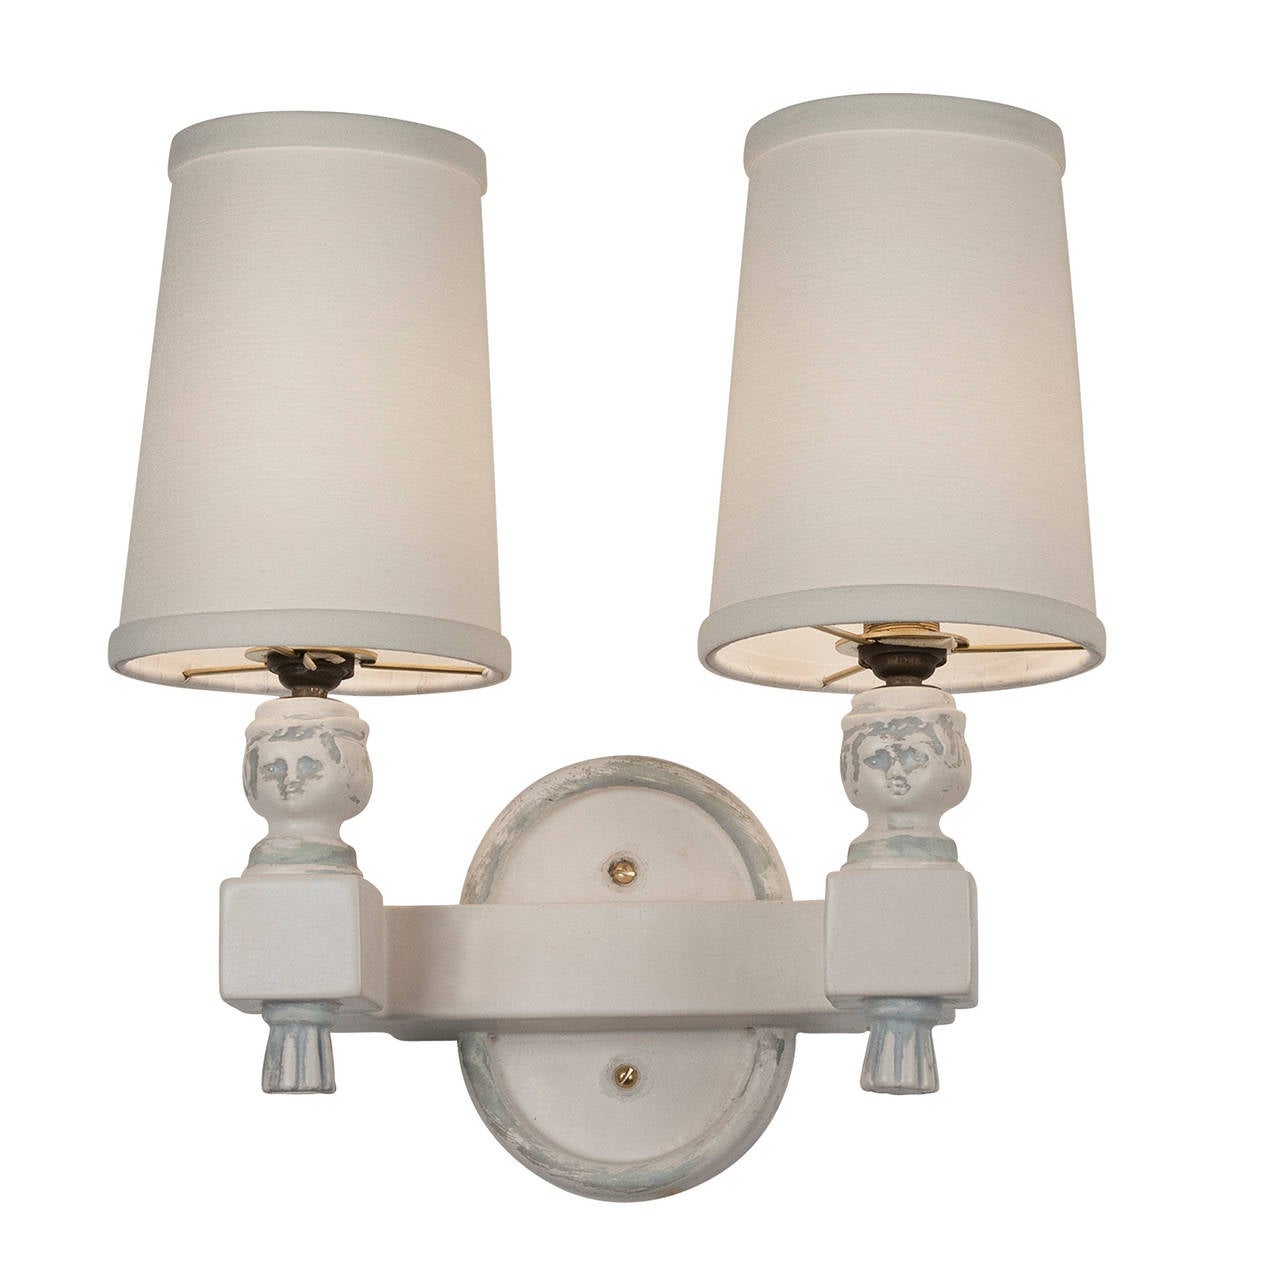 Pair of Arbus Style Sconces In Excellent Condition For Sale In Brooklyn, NY